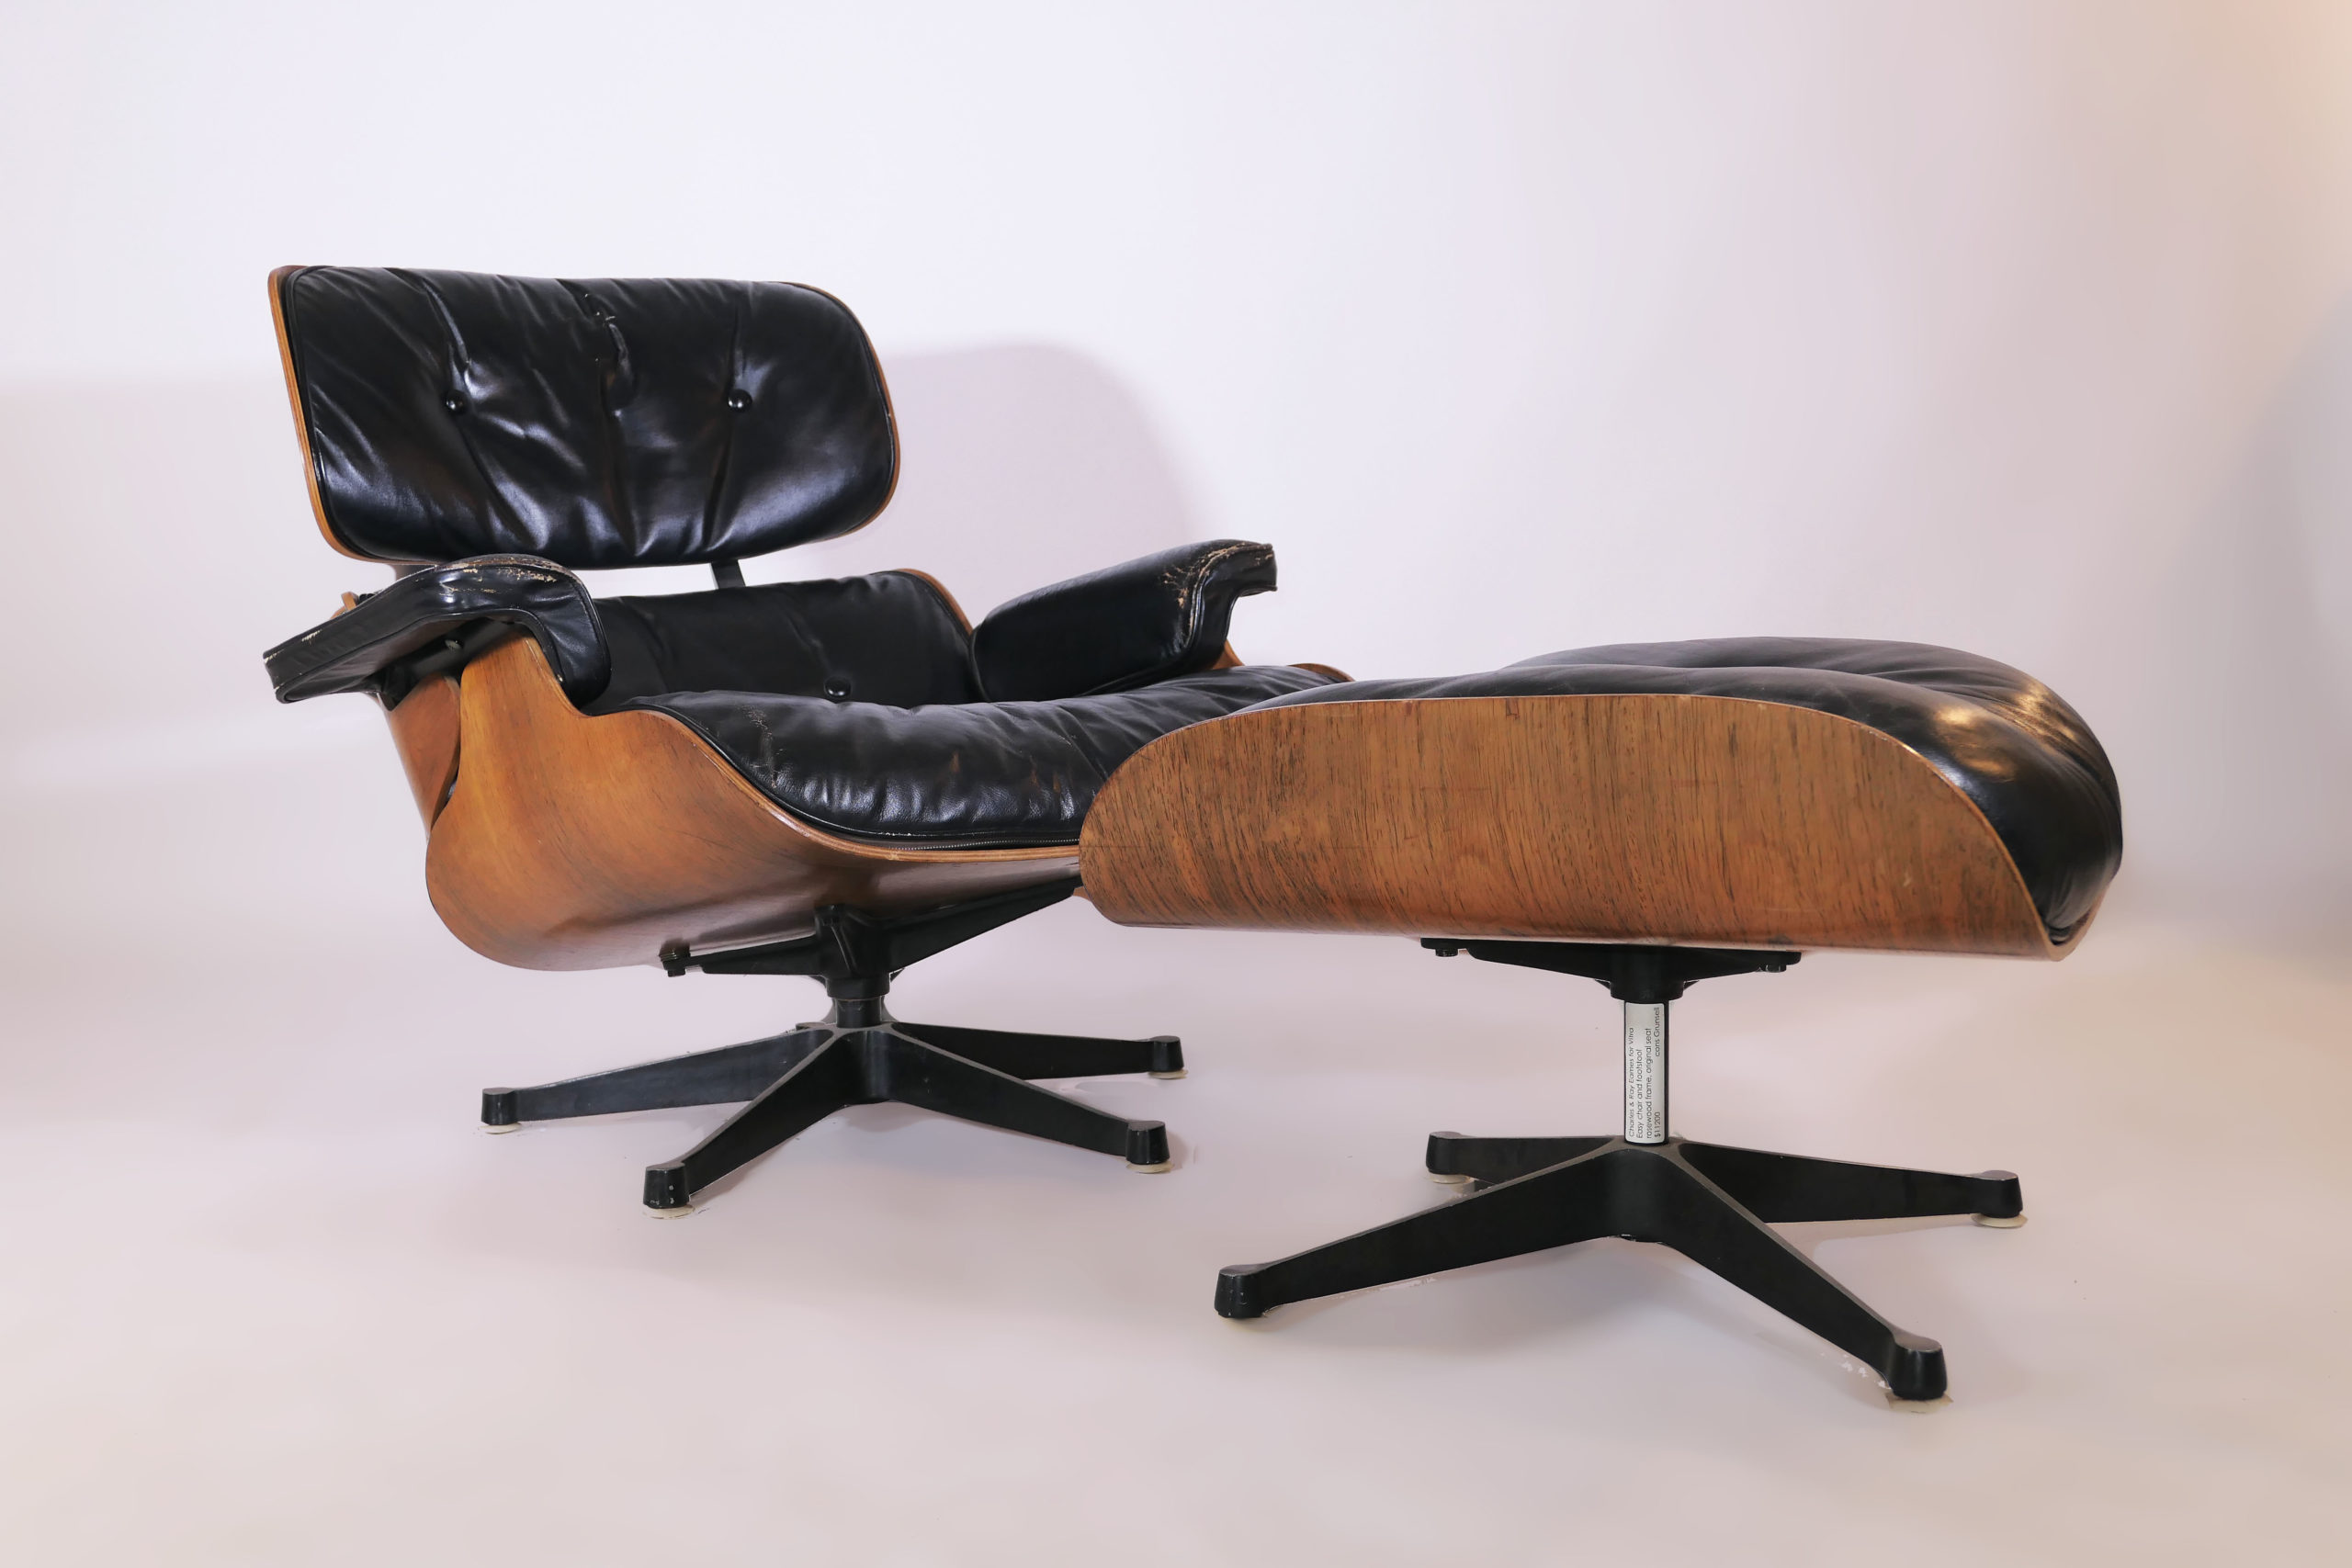 Eames Lounge Chair With Ottoman Vampt Vintage Design